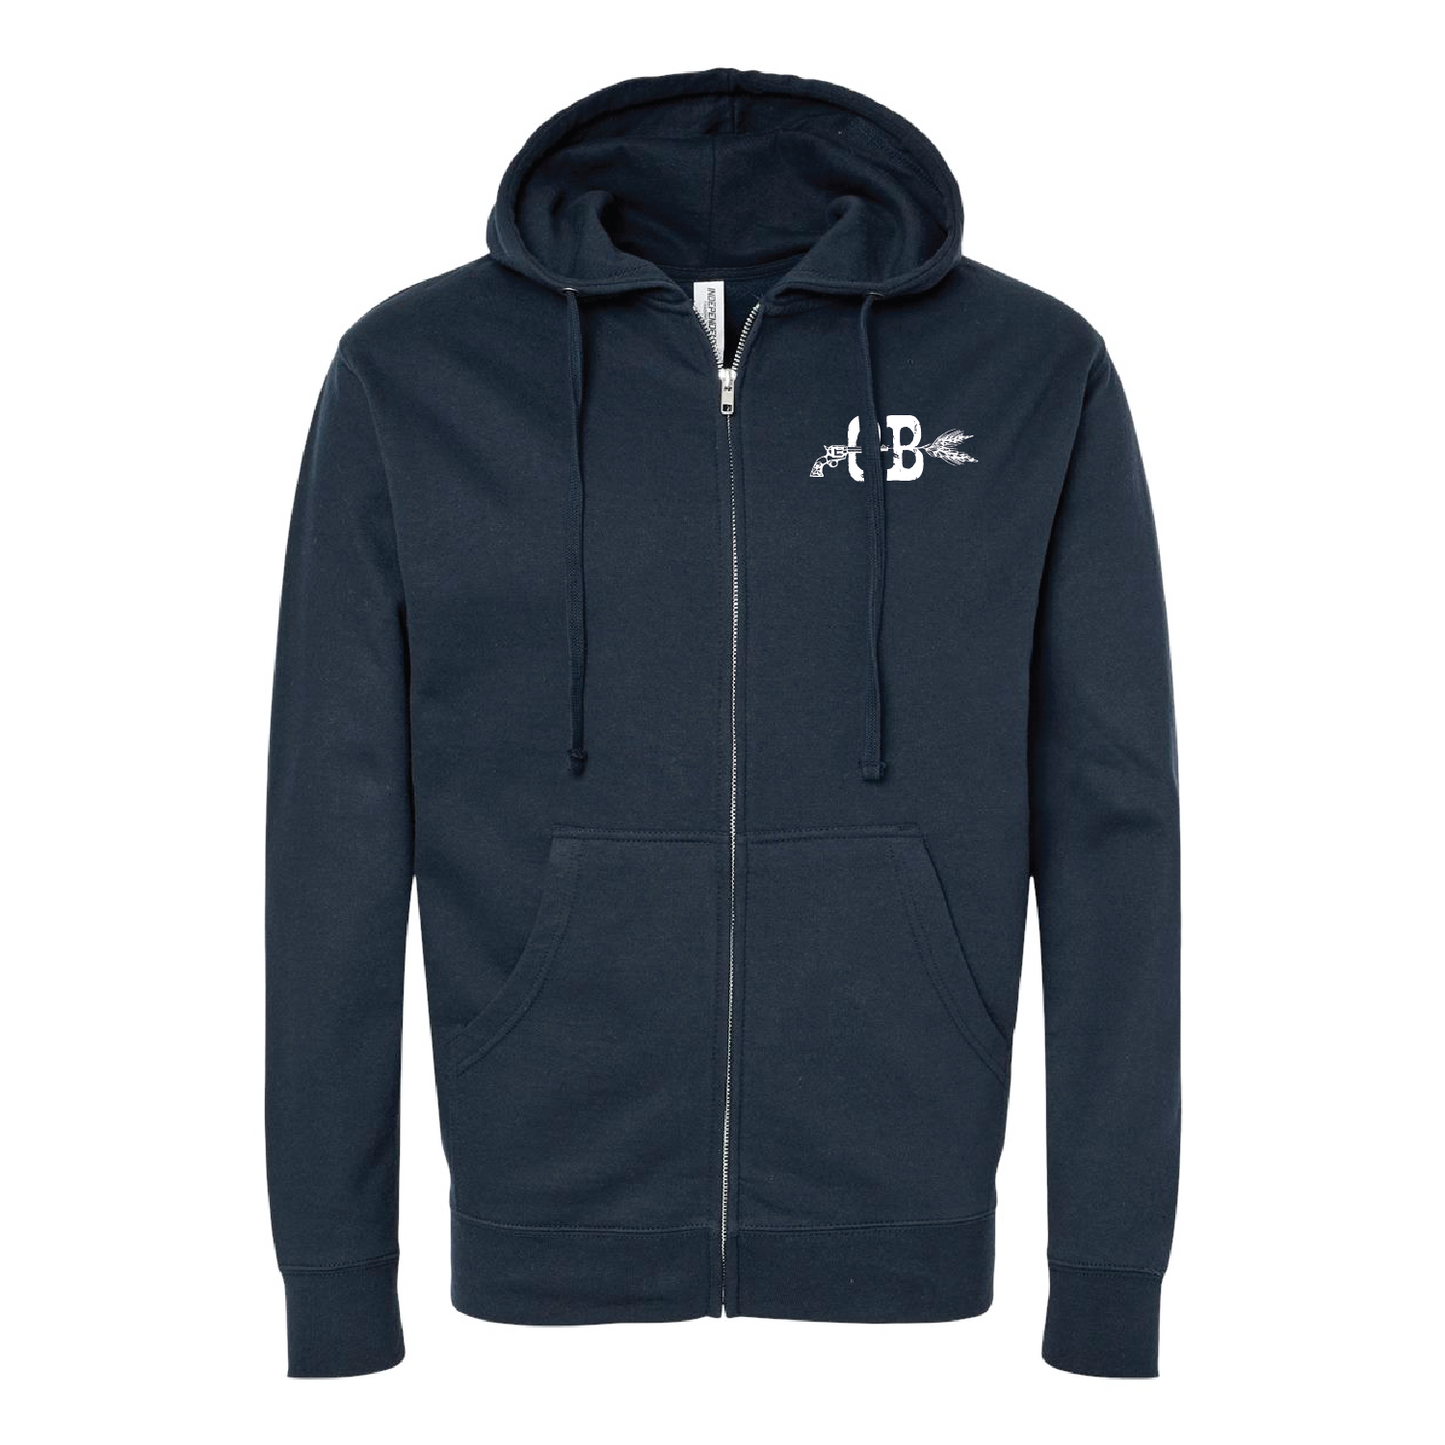 Outlaw Brewing Midweight Full-Zip Hooded Sweatshirt 1